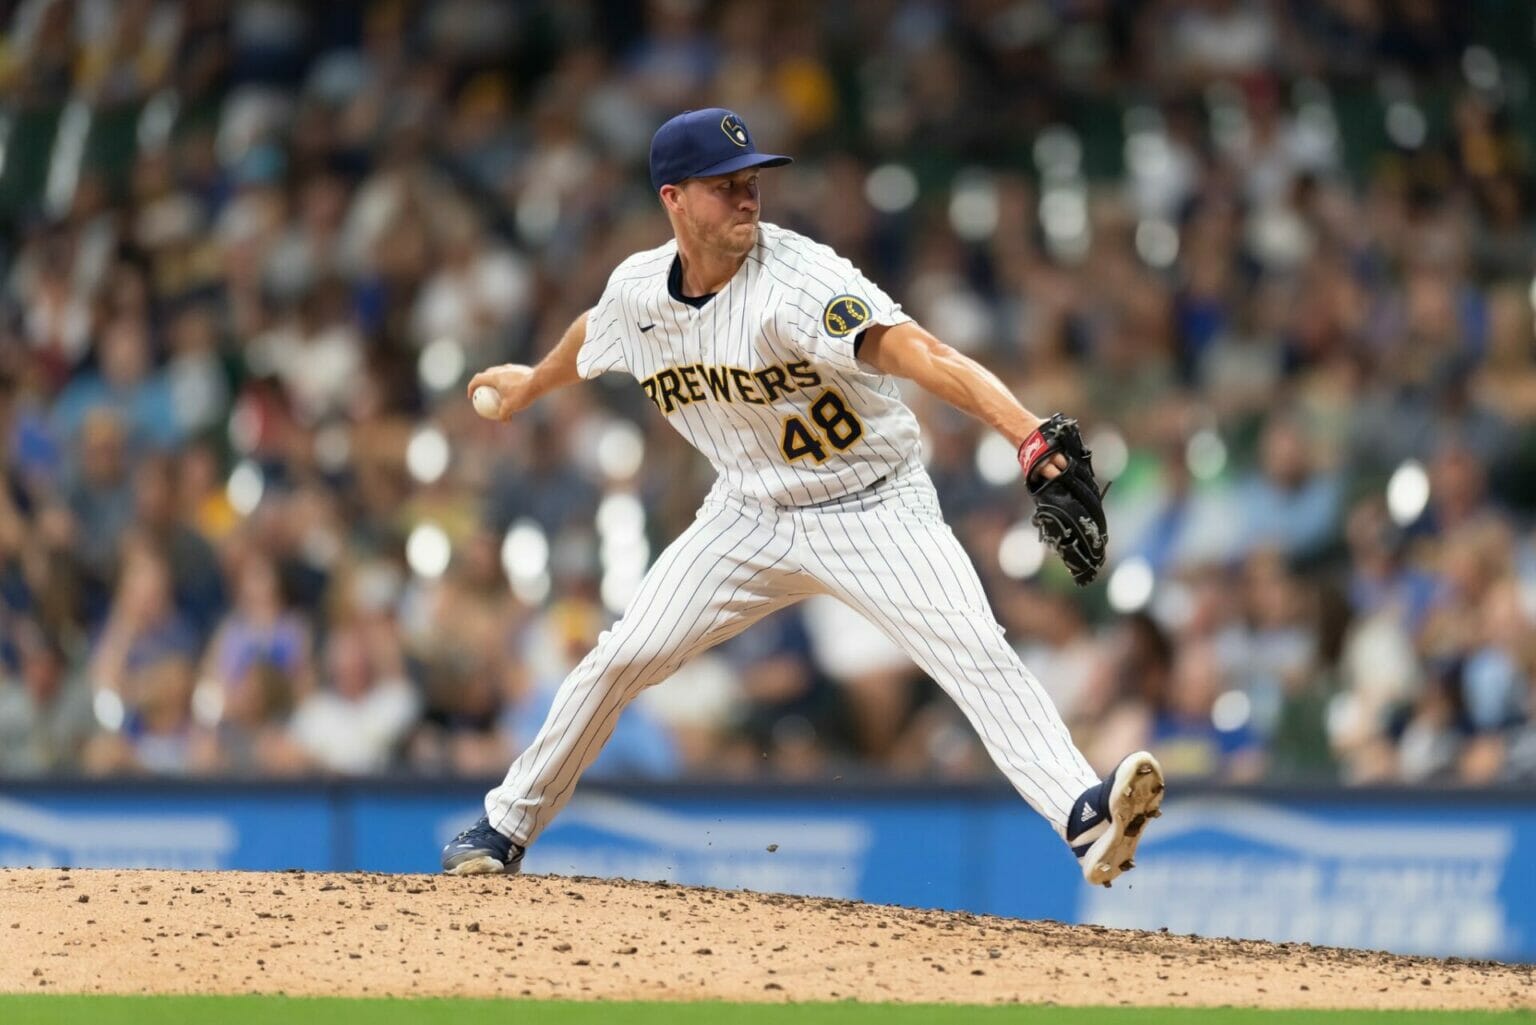 Trevor Gott pitching for the Milwaukee Brewers